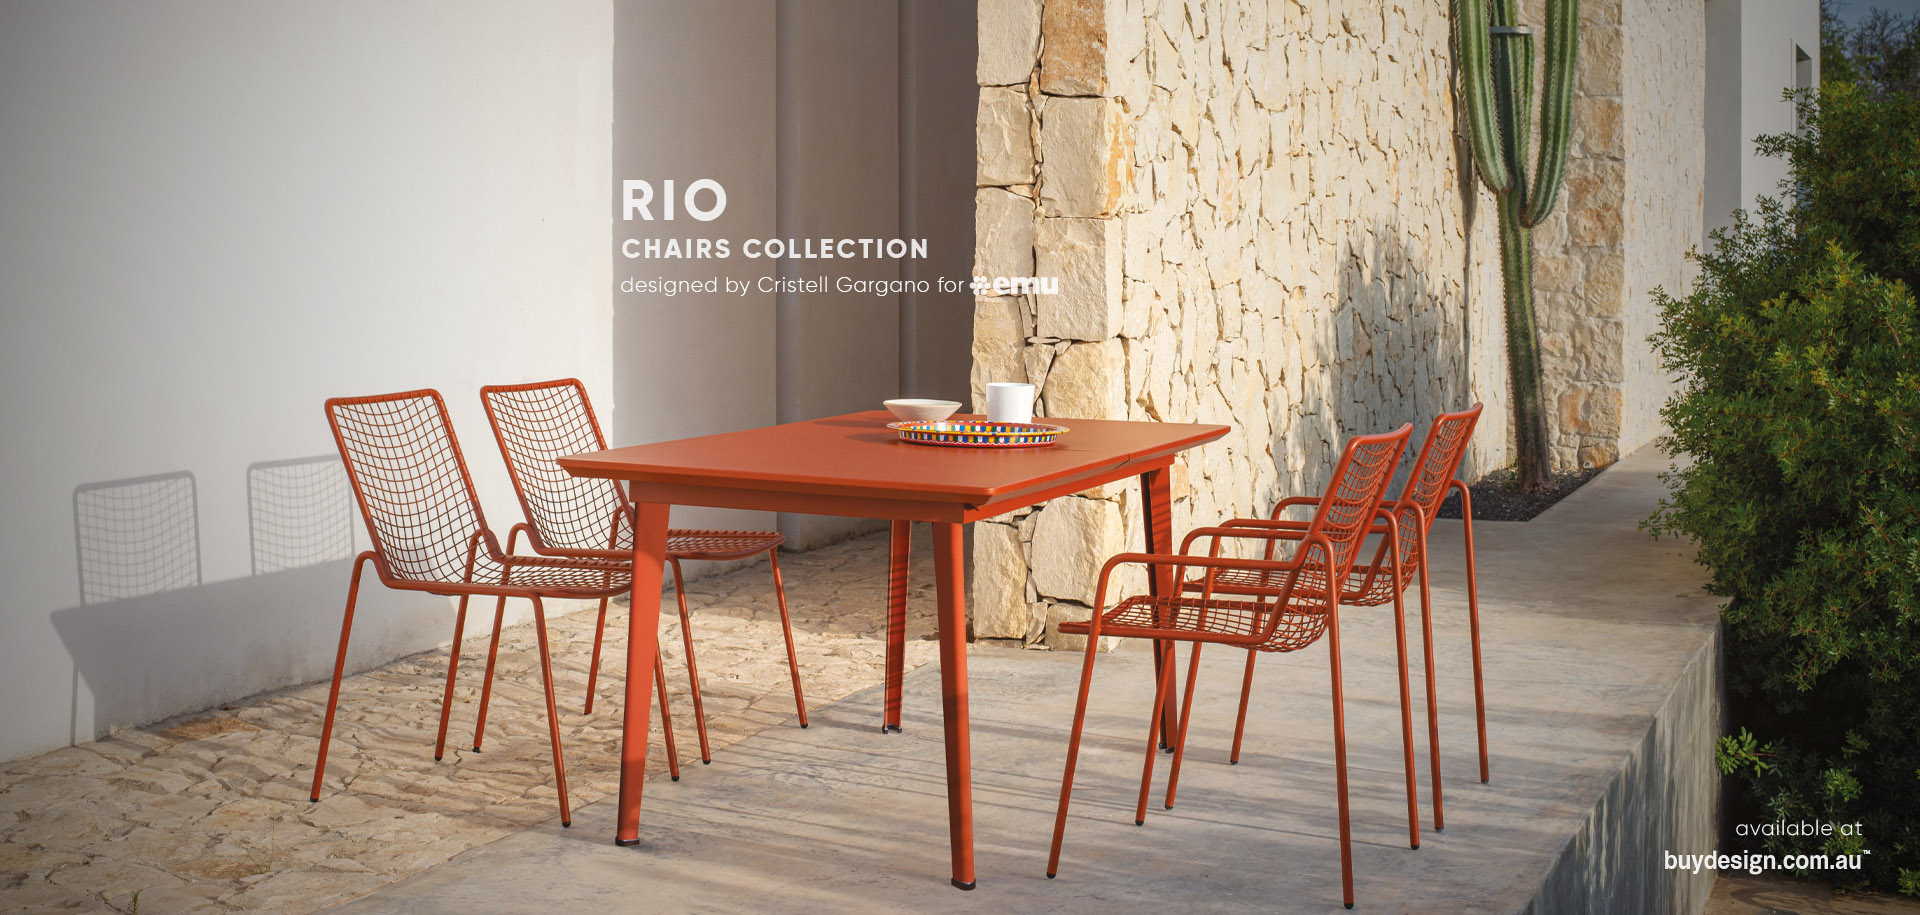 BuyDesign EMU Rio Chairs Collection